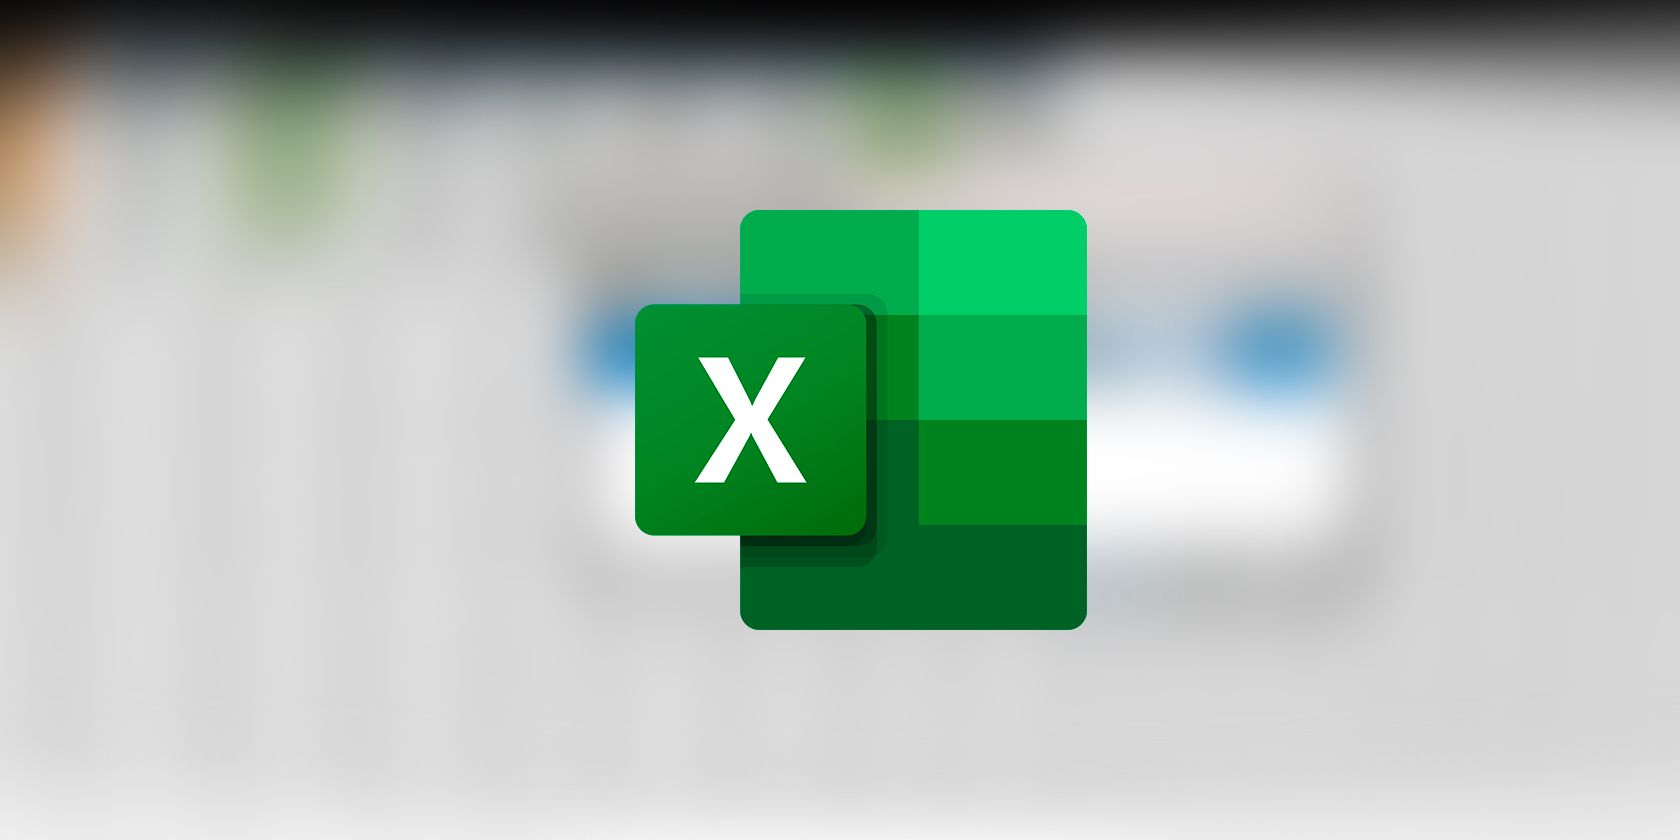 Excel logo on a blurred background